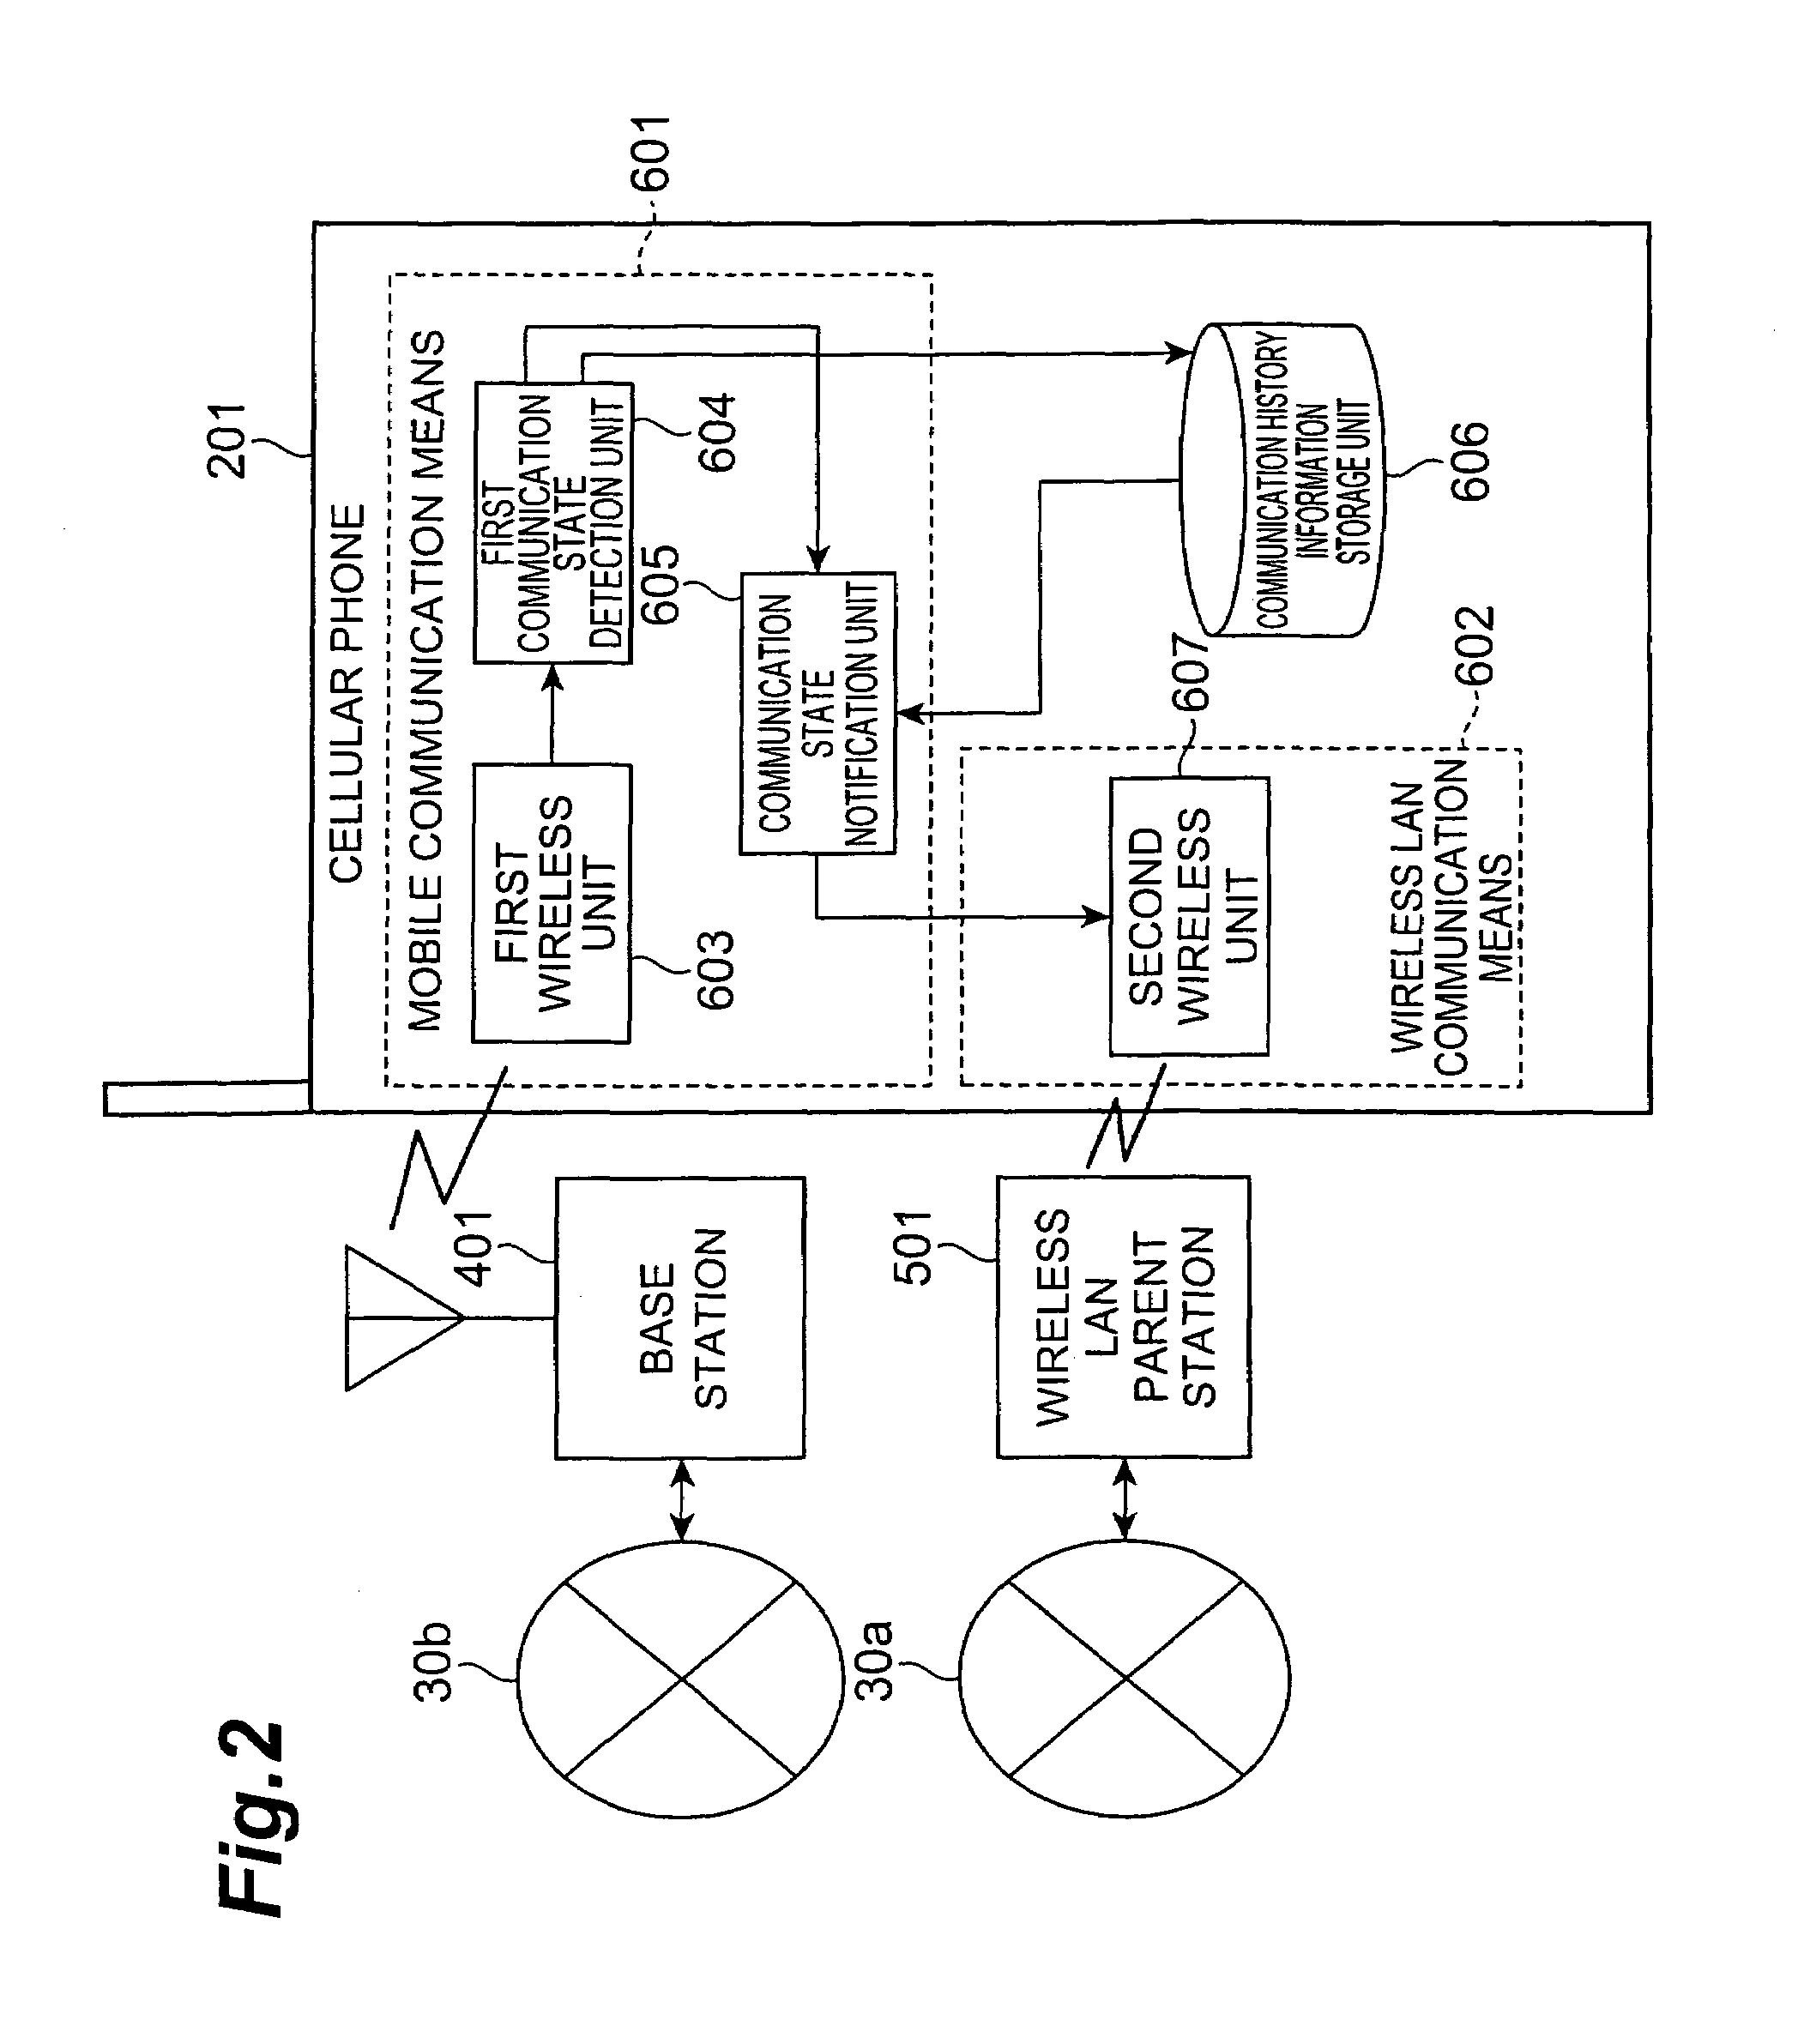 Communication terminal, communication state information providing system, and method of providing communication state information